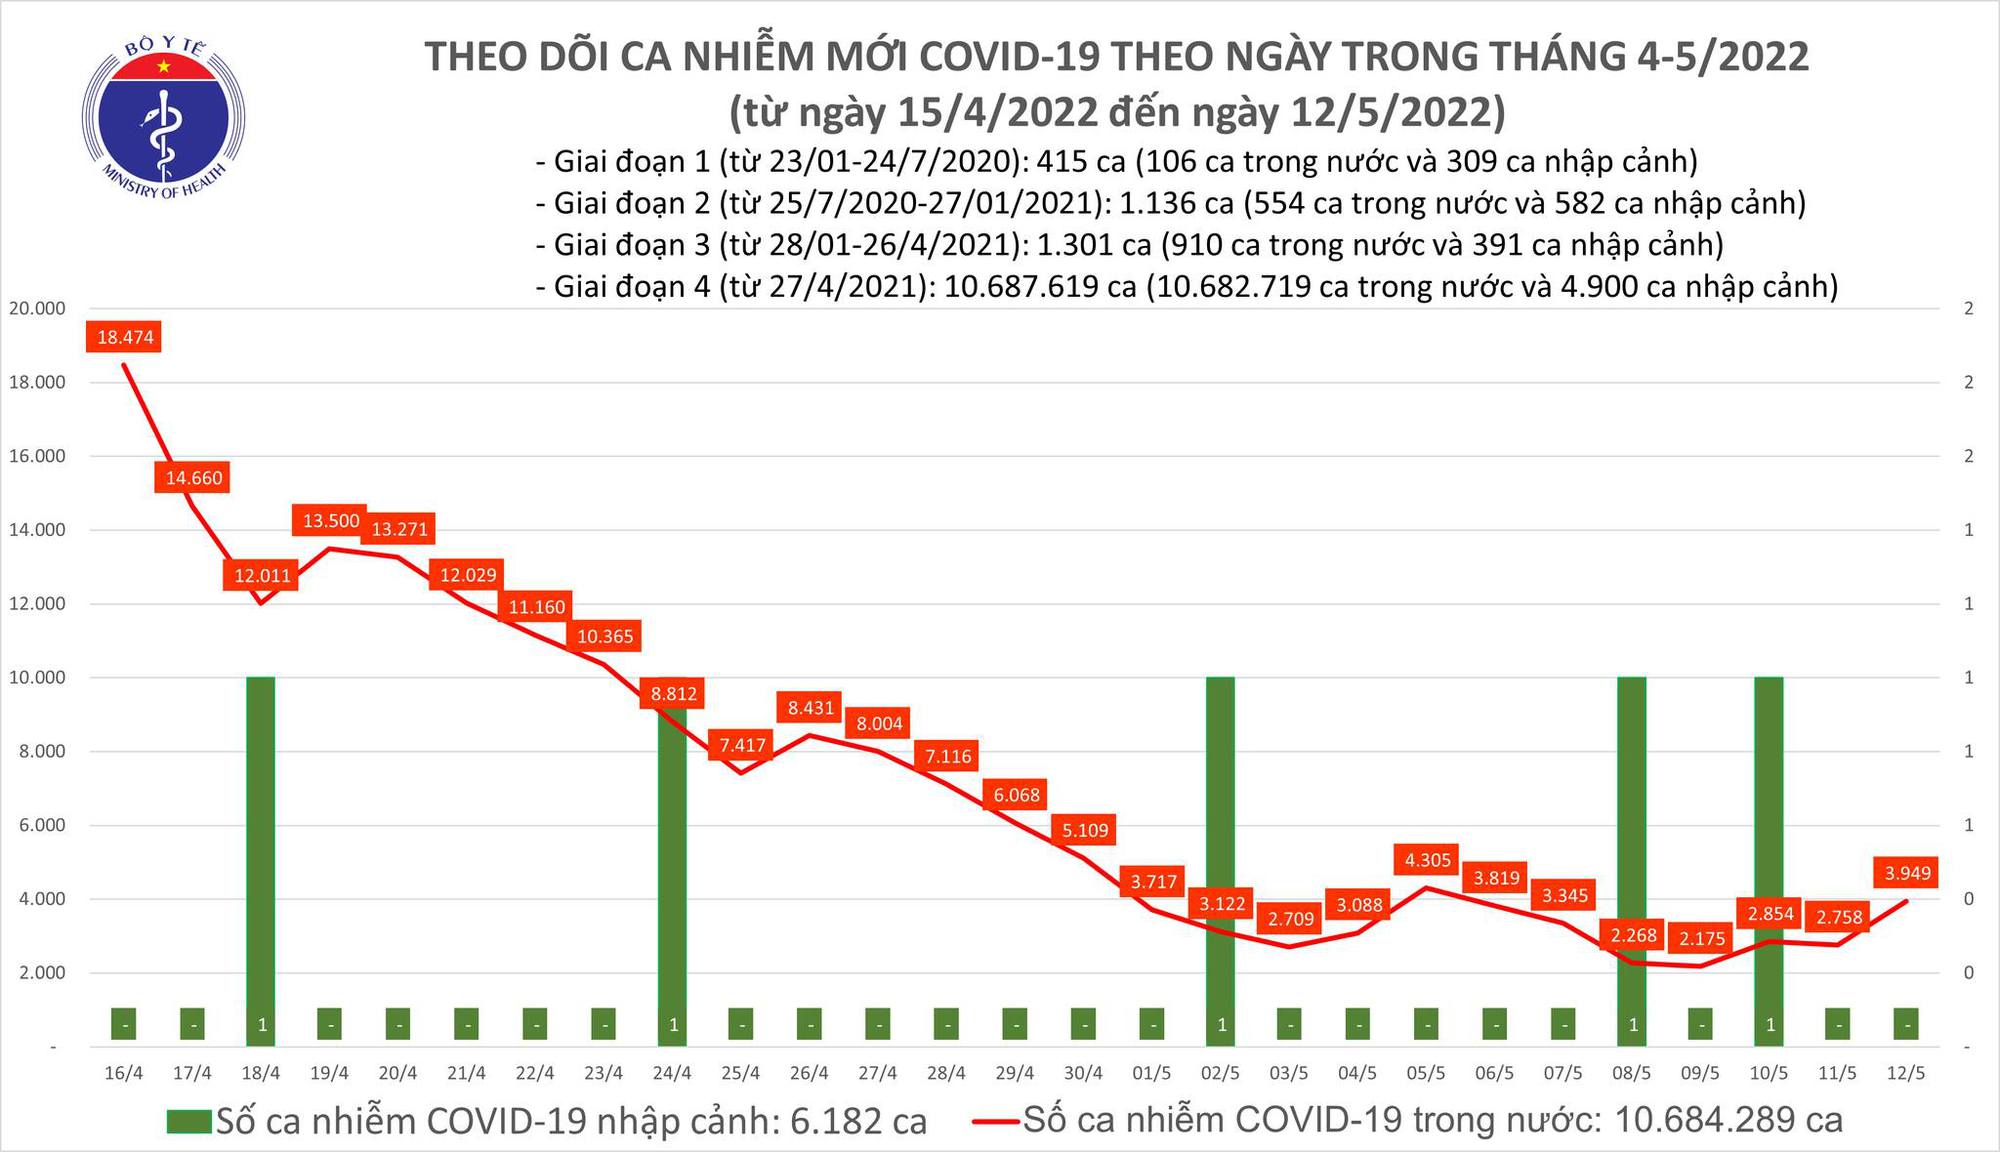 Covid-19 on May 12: The number of new cases increased slightly - Photo 1.